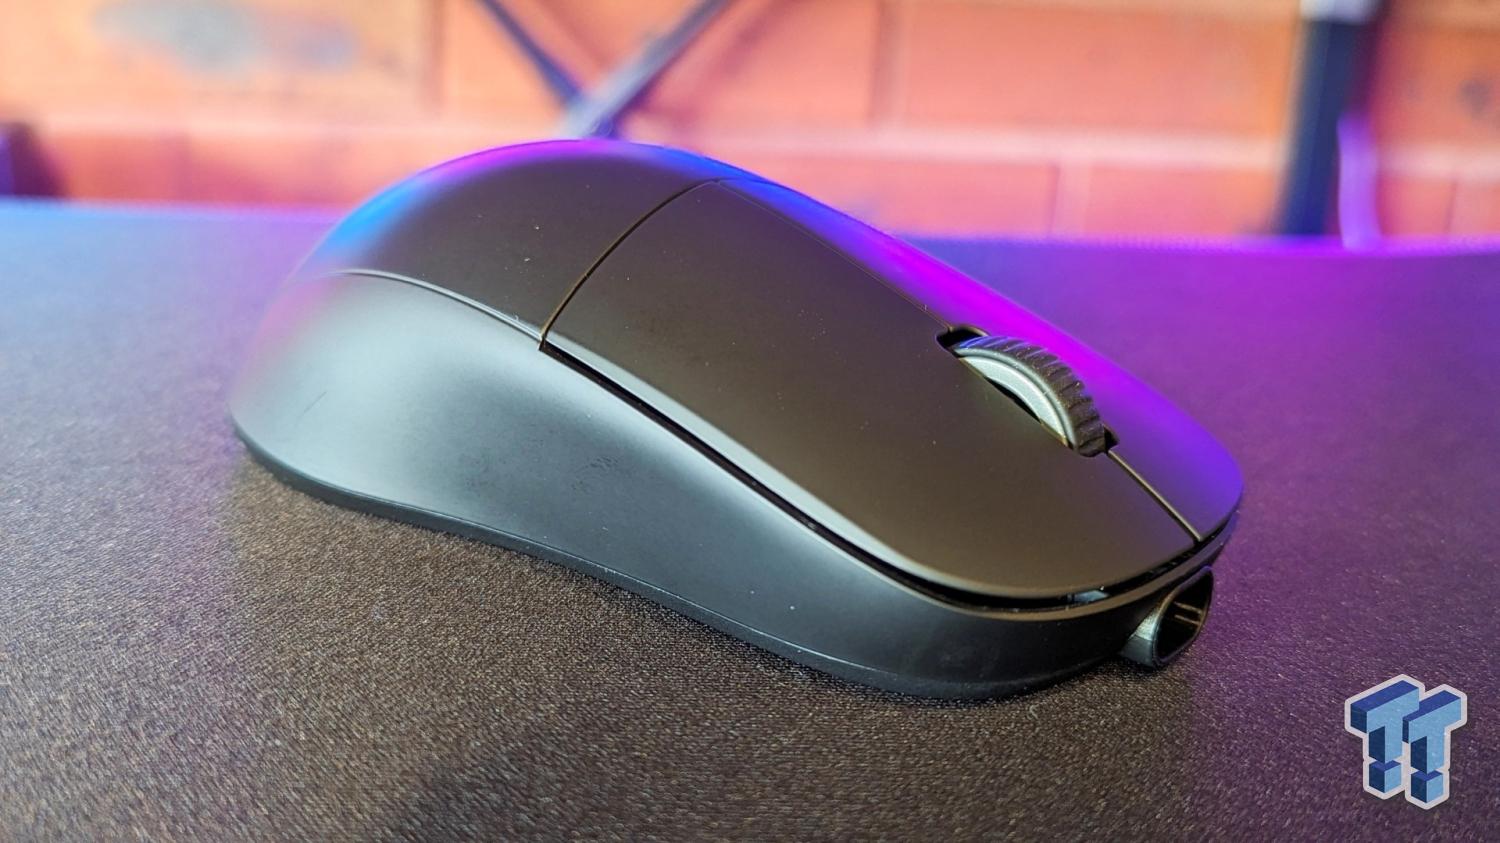 Endgame Gear XM2we Mouse Review